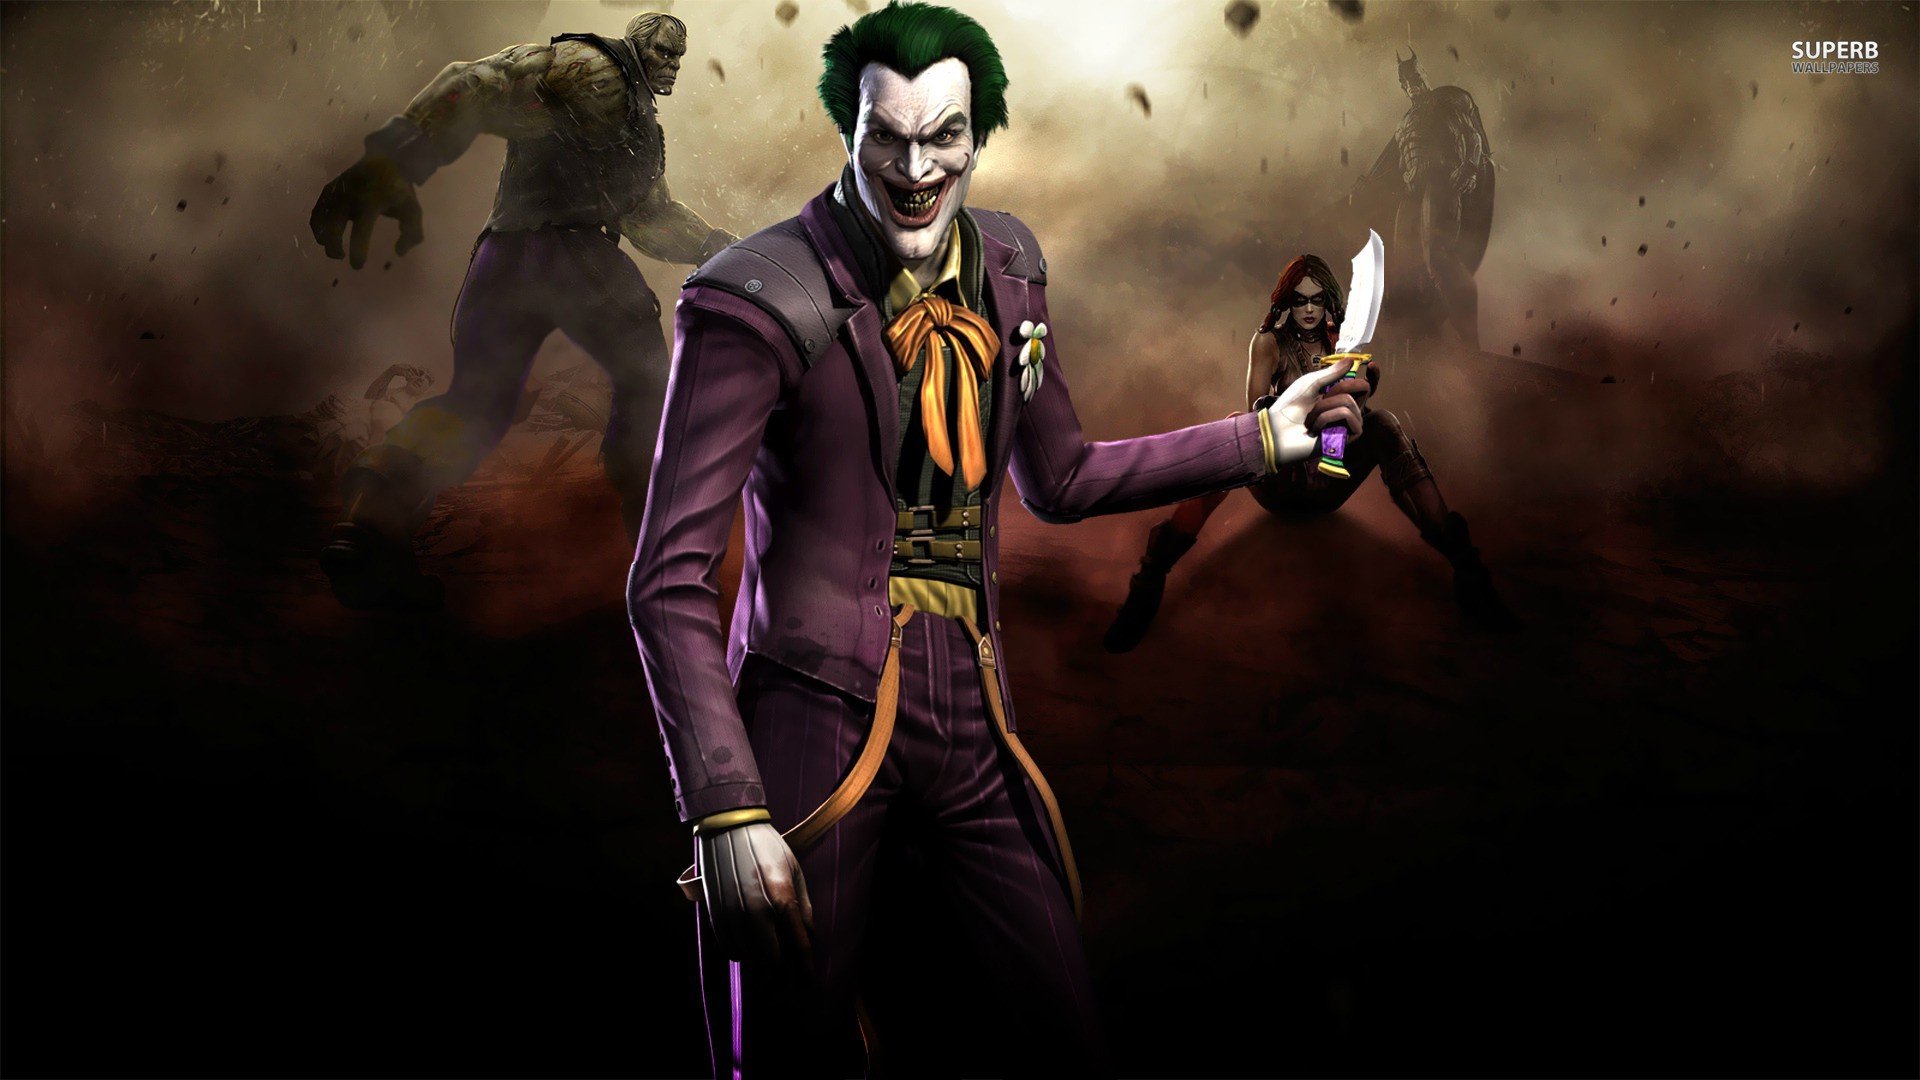 video, Games, The, Joker, Posters, Gods, Screens, Injustice Wallpapers